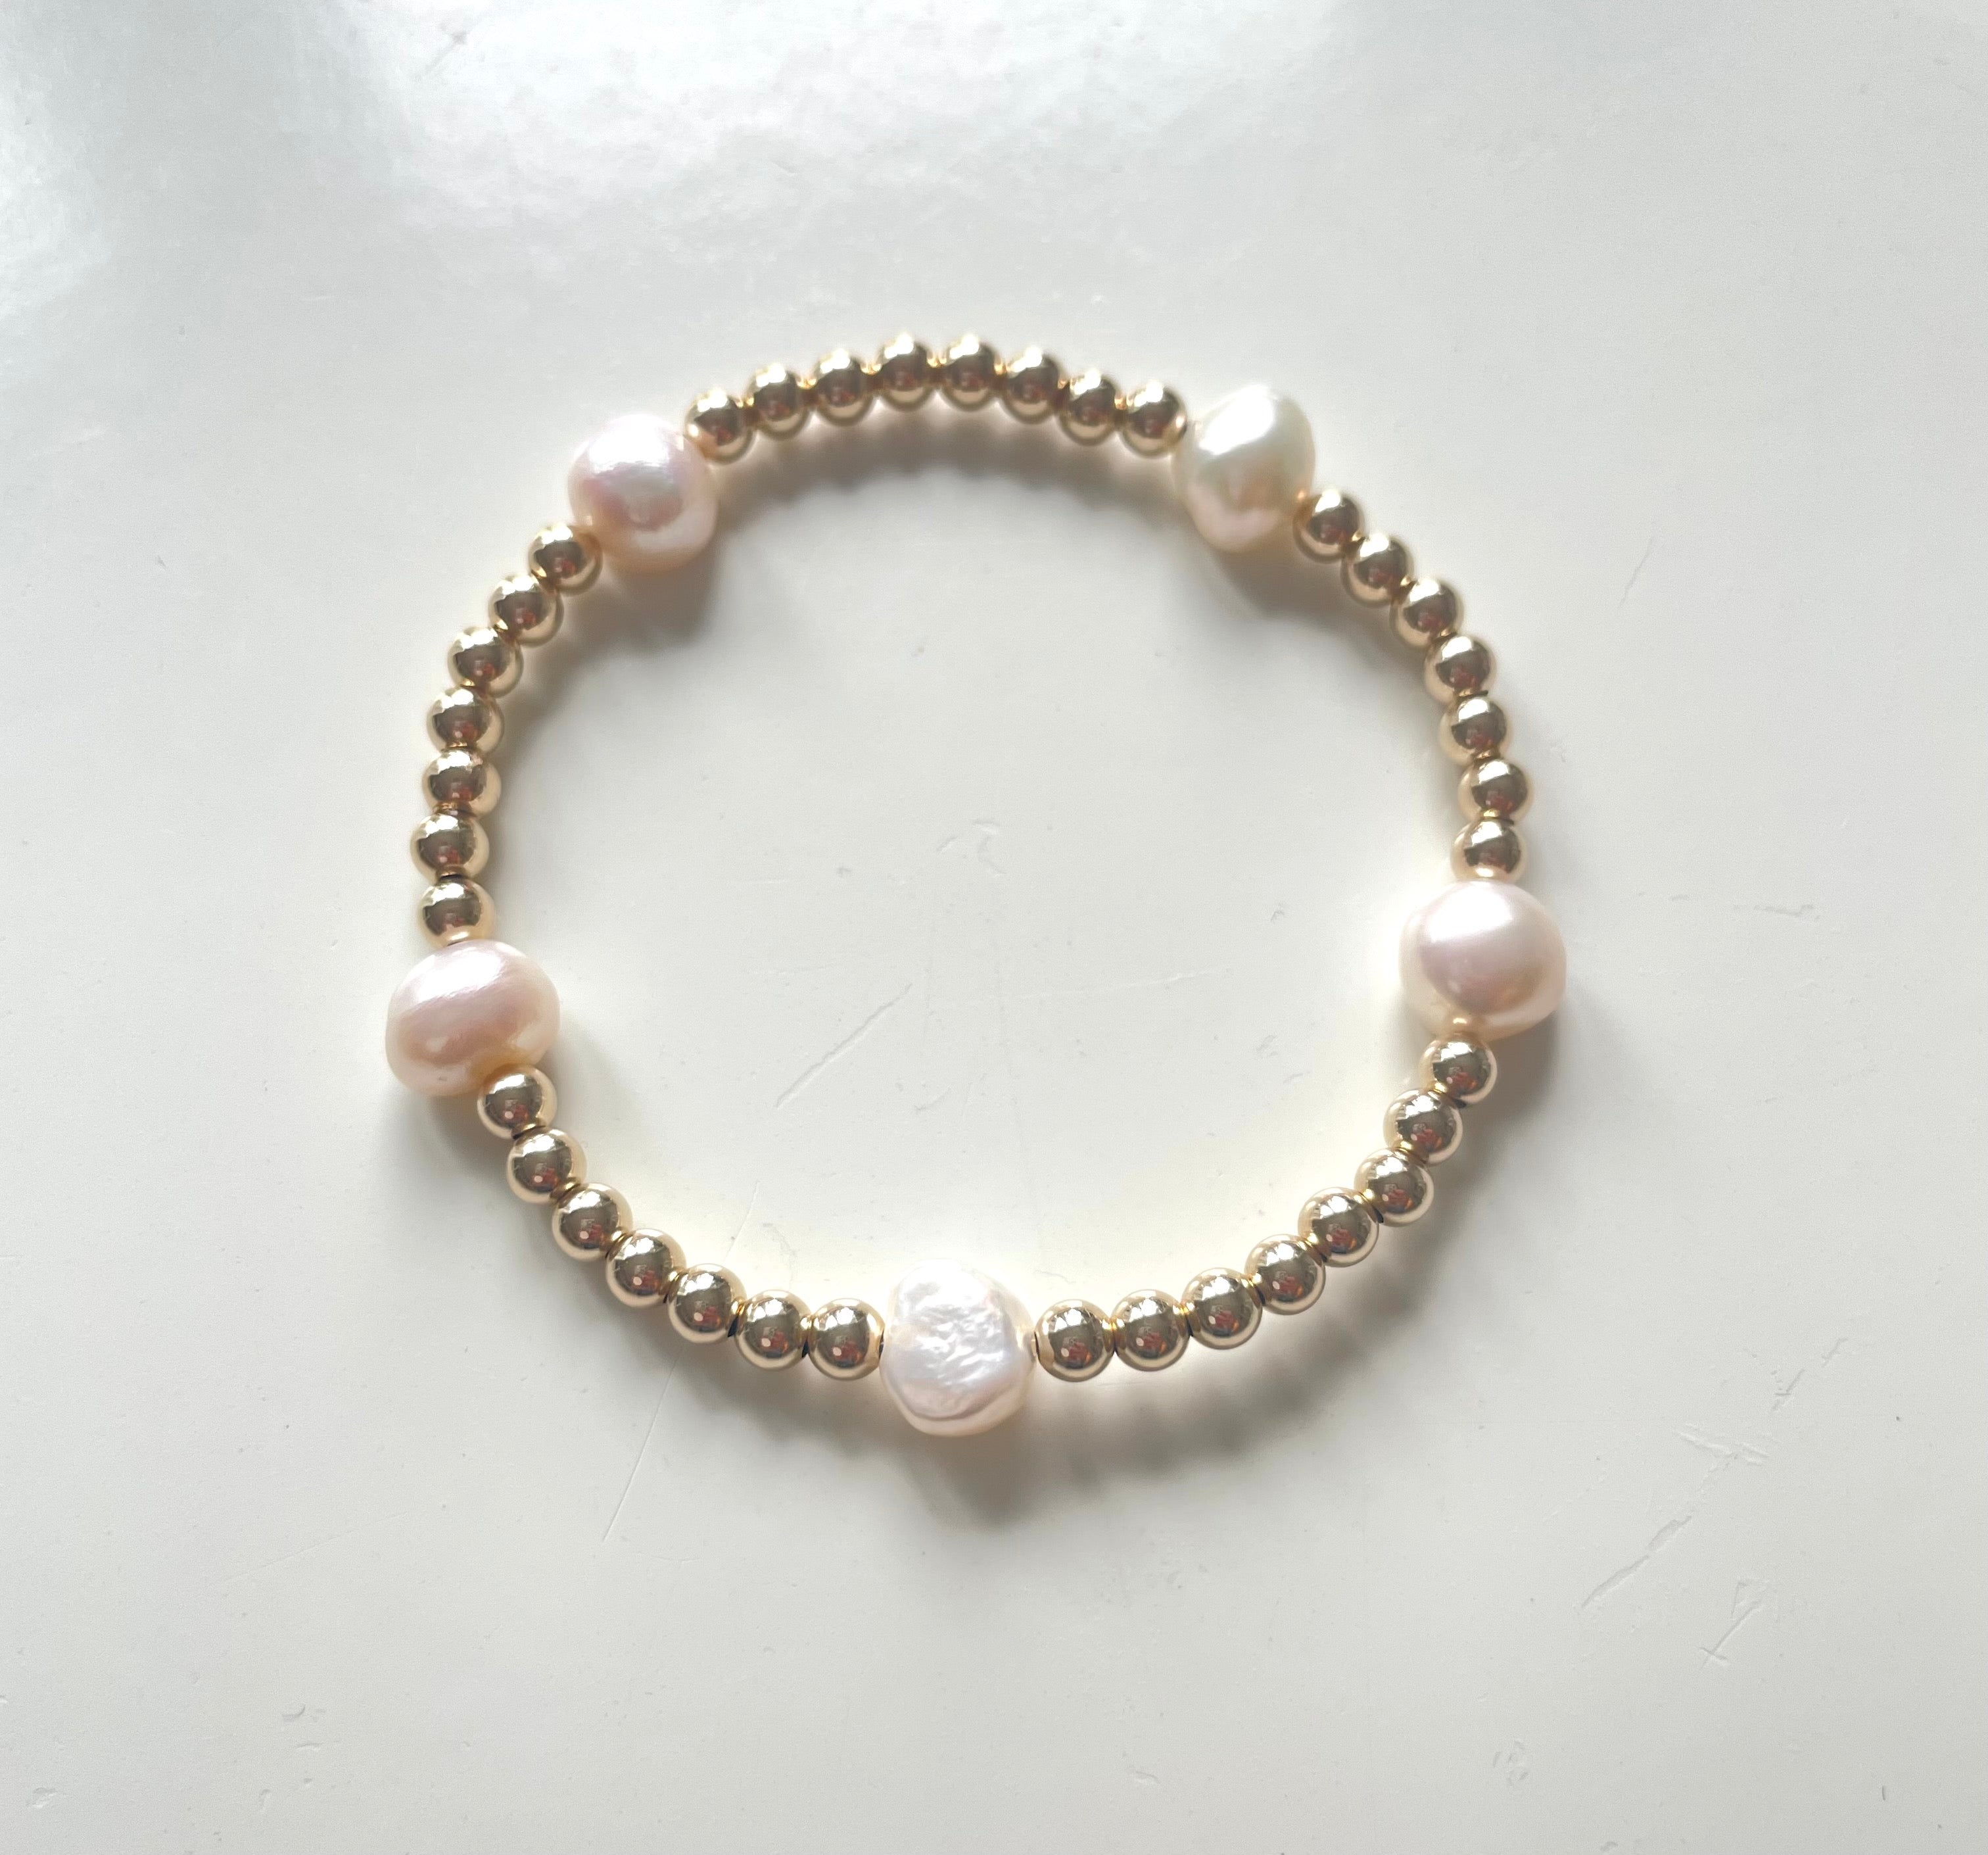 Pearl Dreams, Pearl and Gold Beaded Bracelet